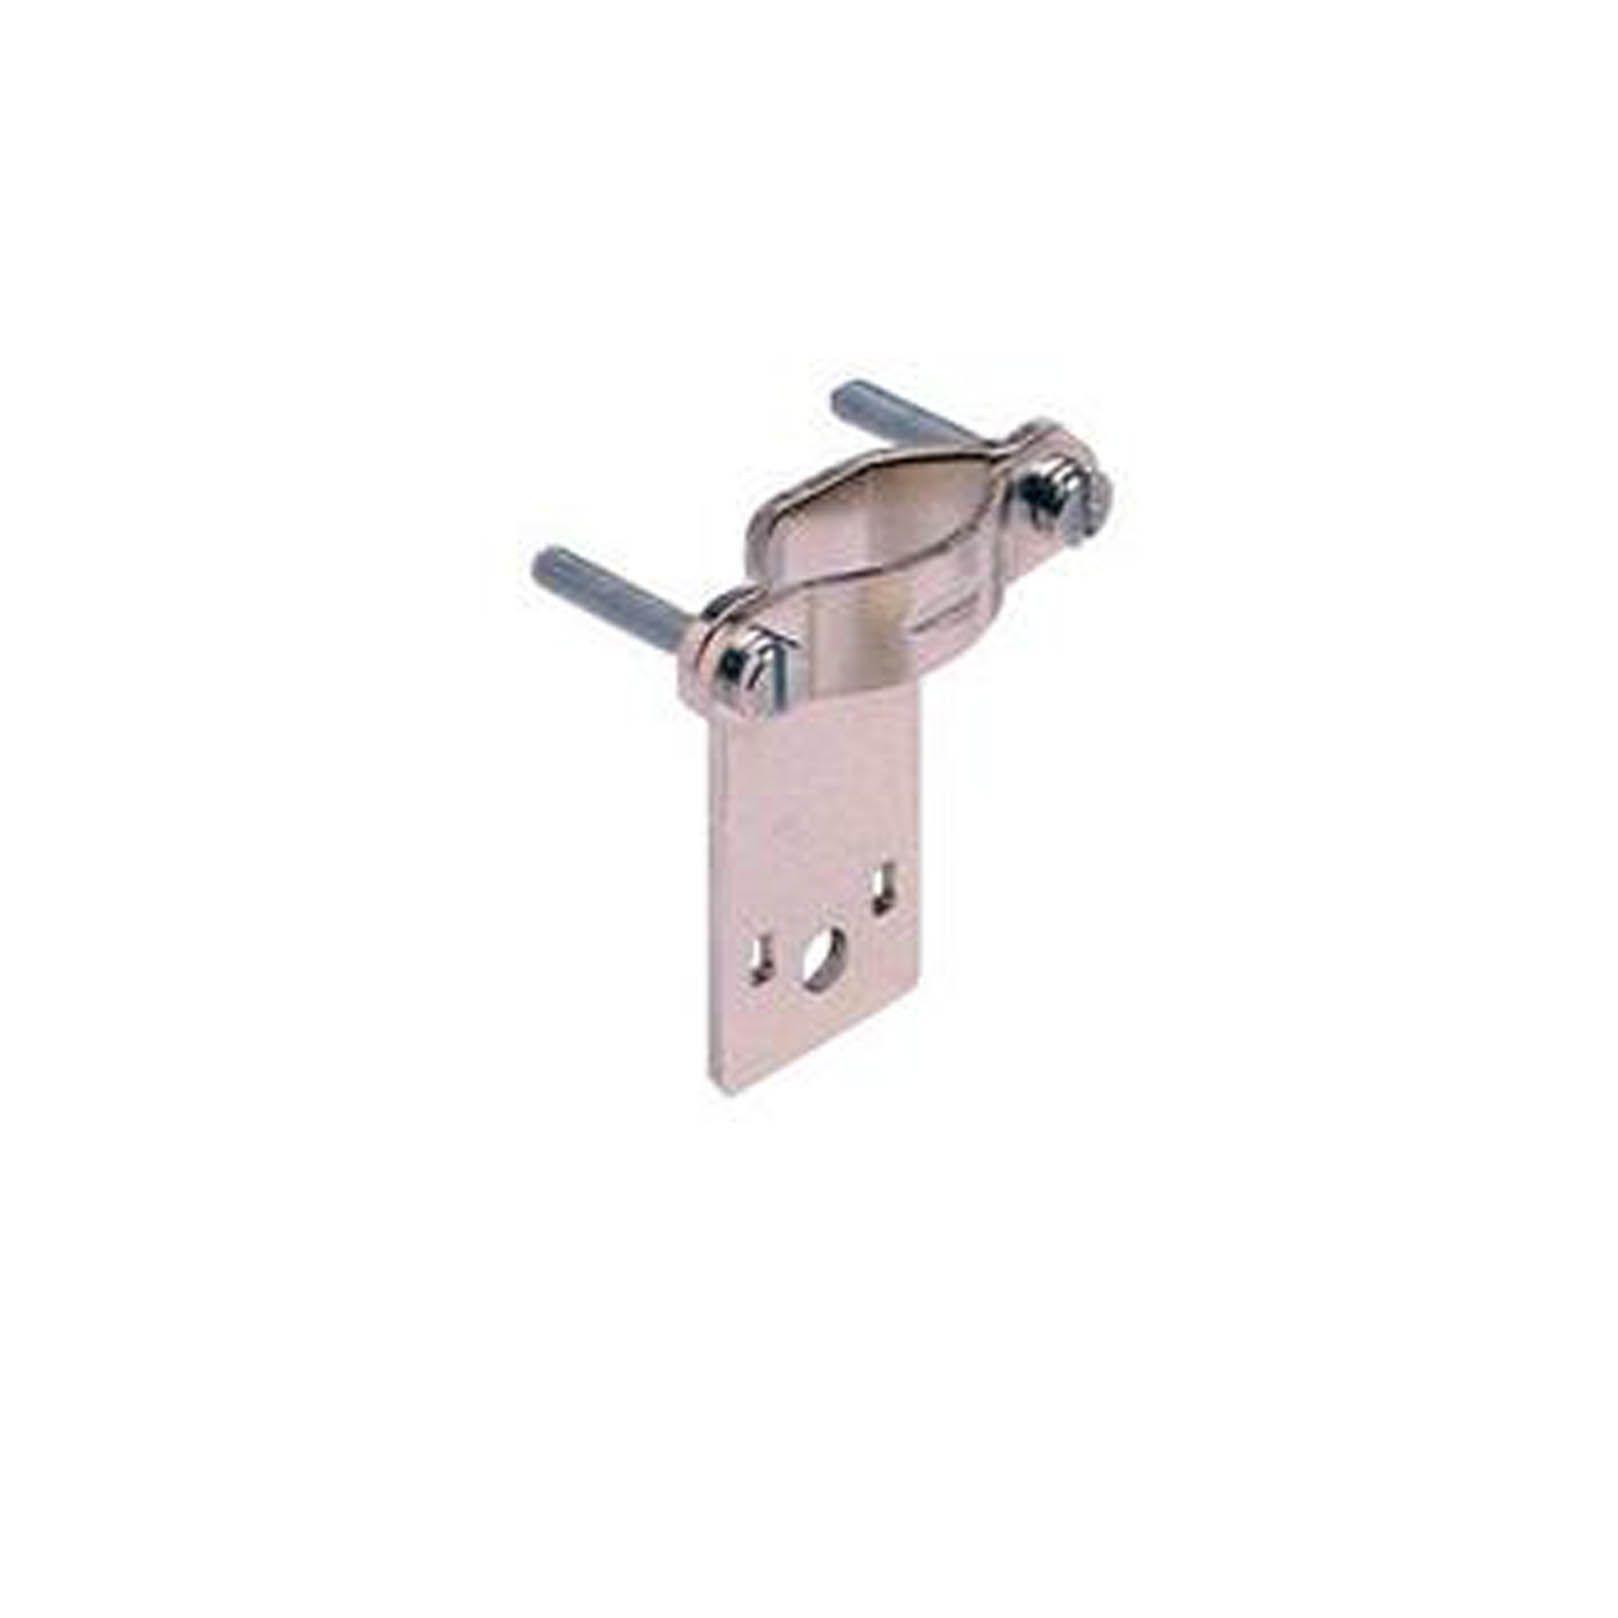 Mencom CRAD Cable Clamping Plate for DIN rail Mounted Inserts